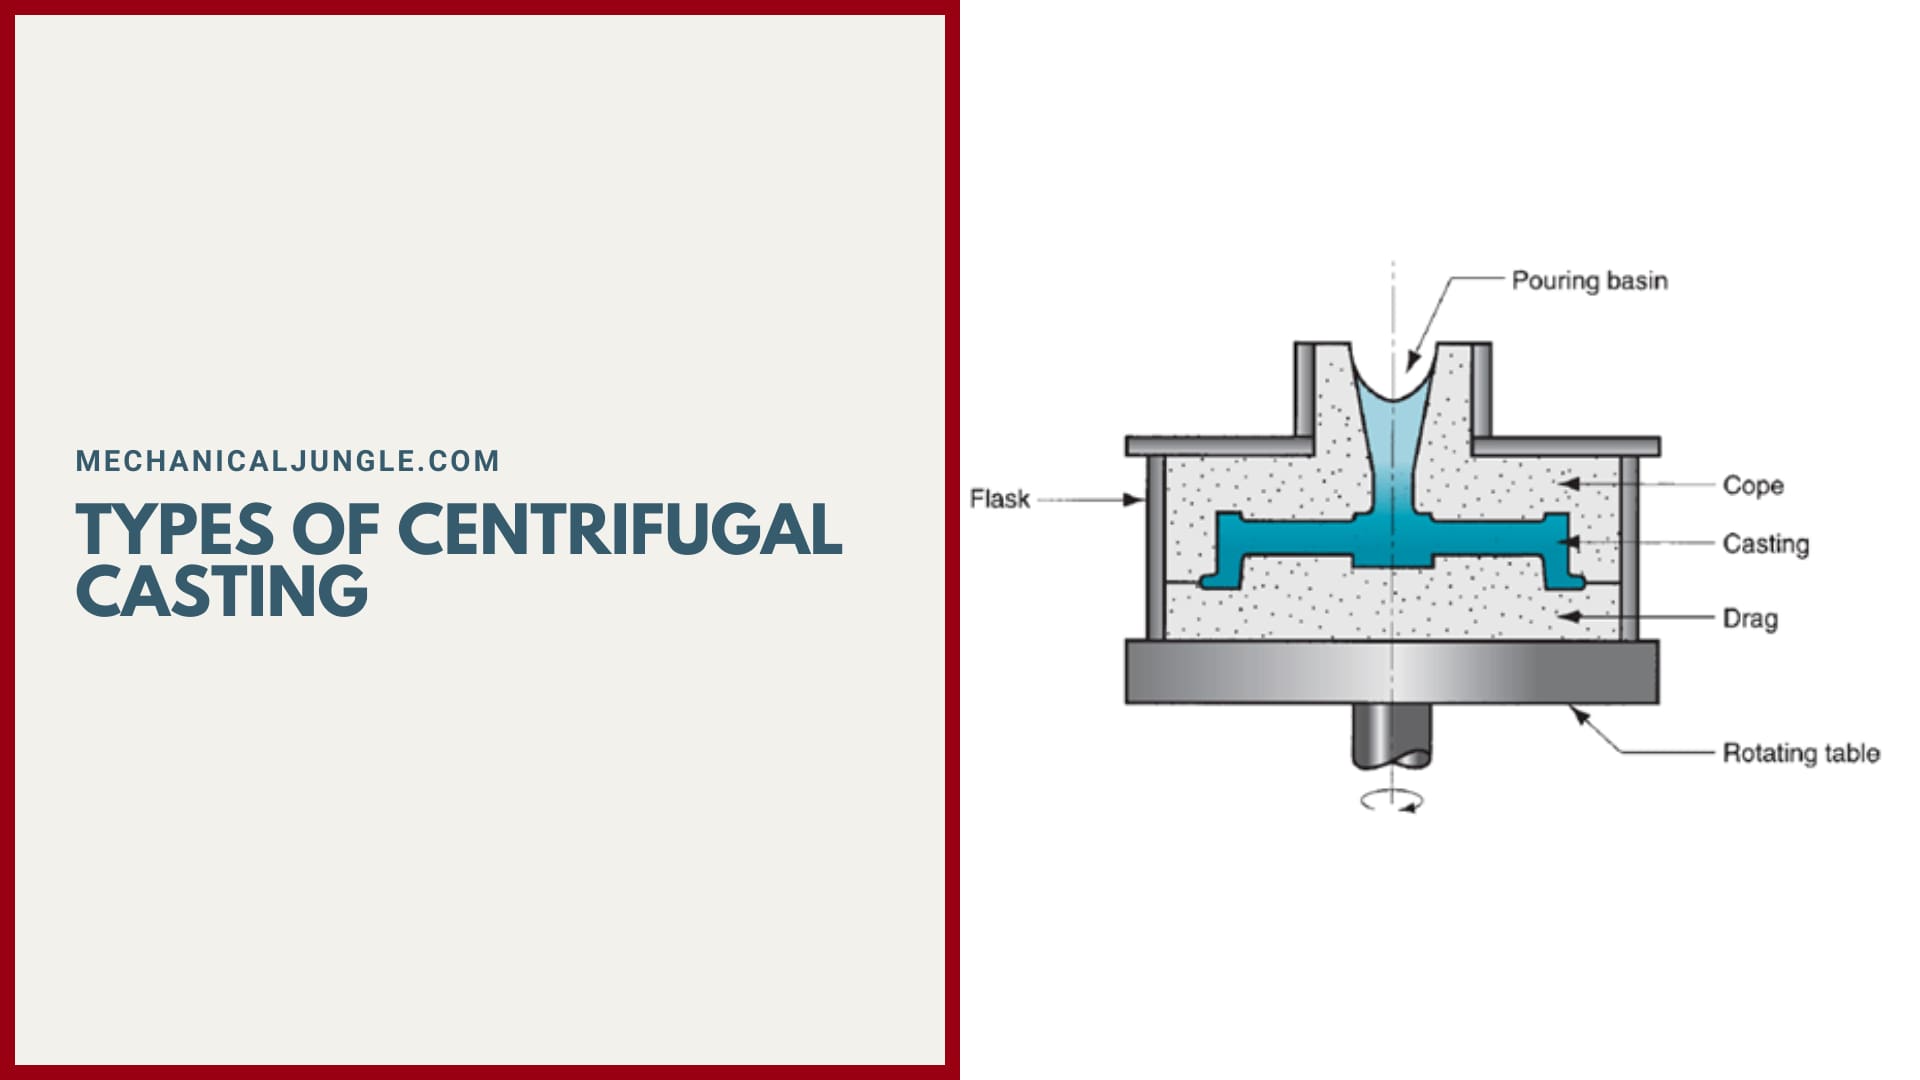 Types of Centrifugal Casting